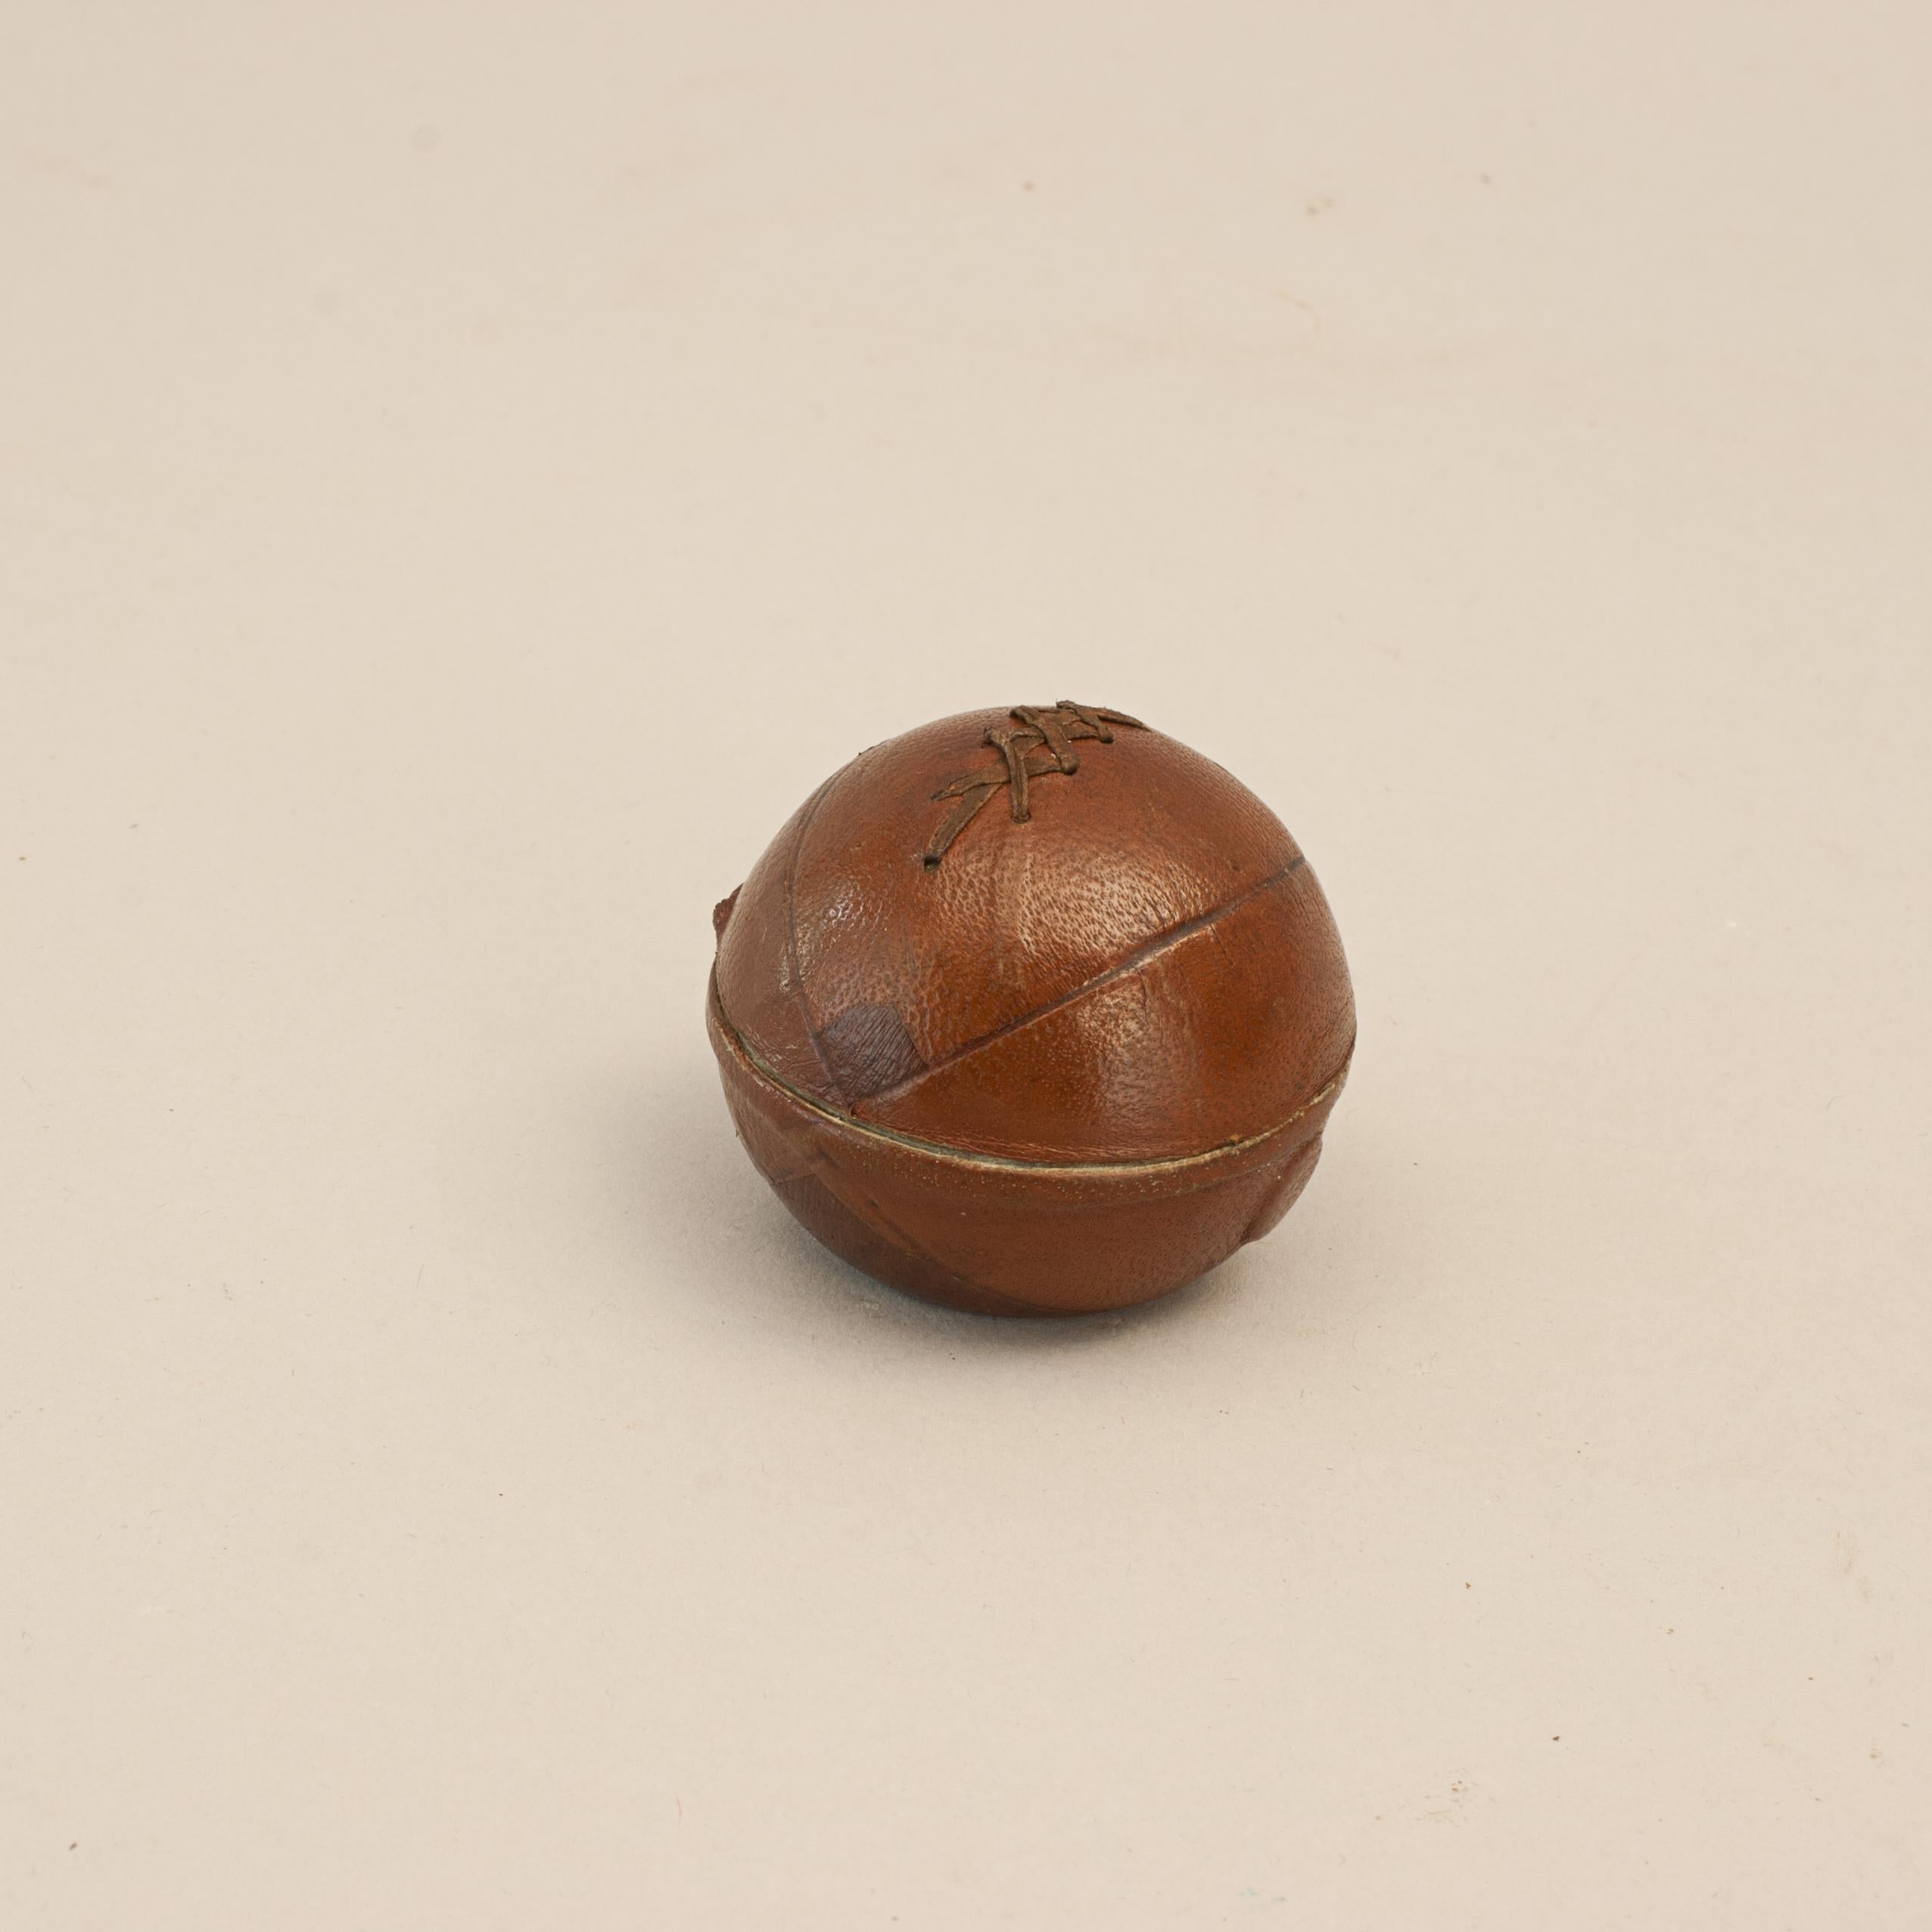 Vintage Football Inkwell With Leather Cover. 3